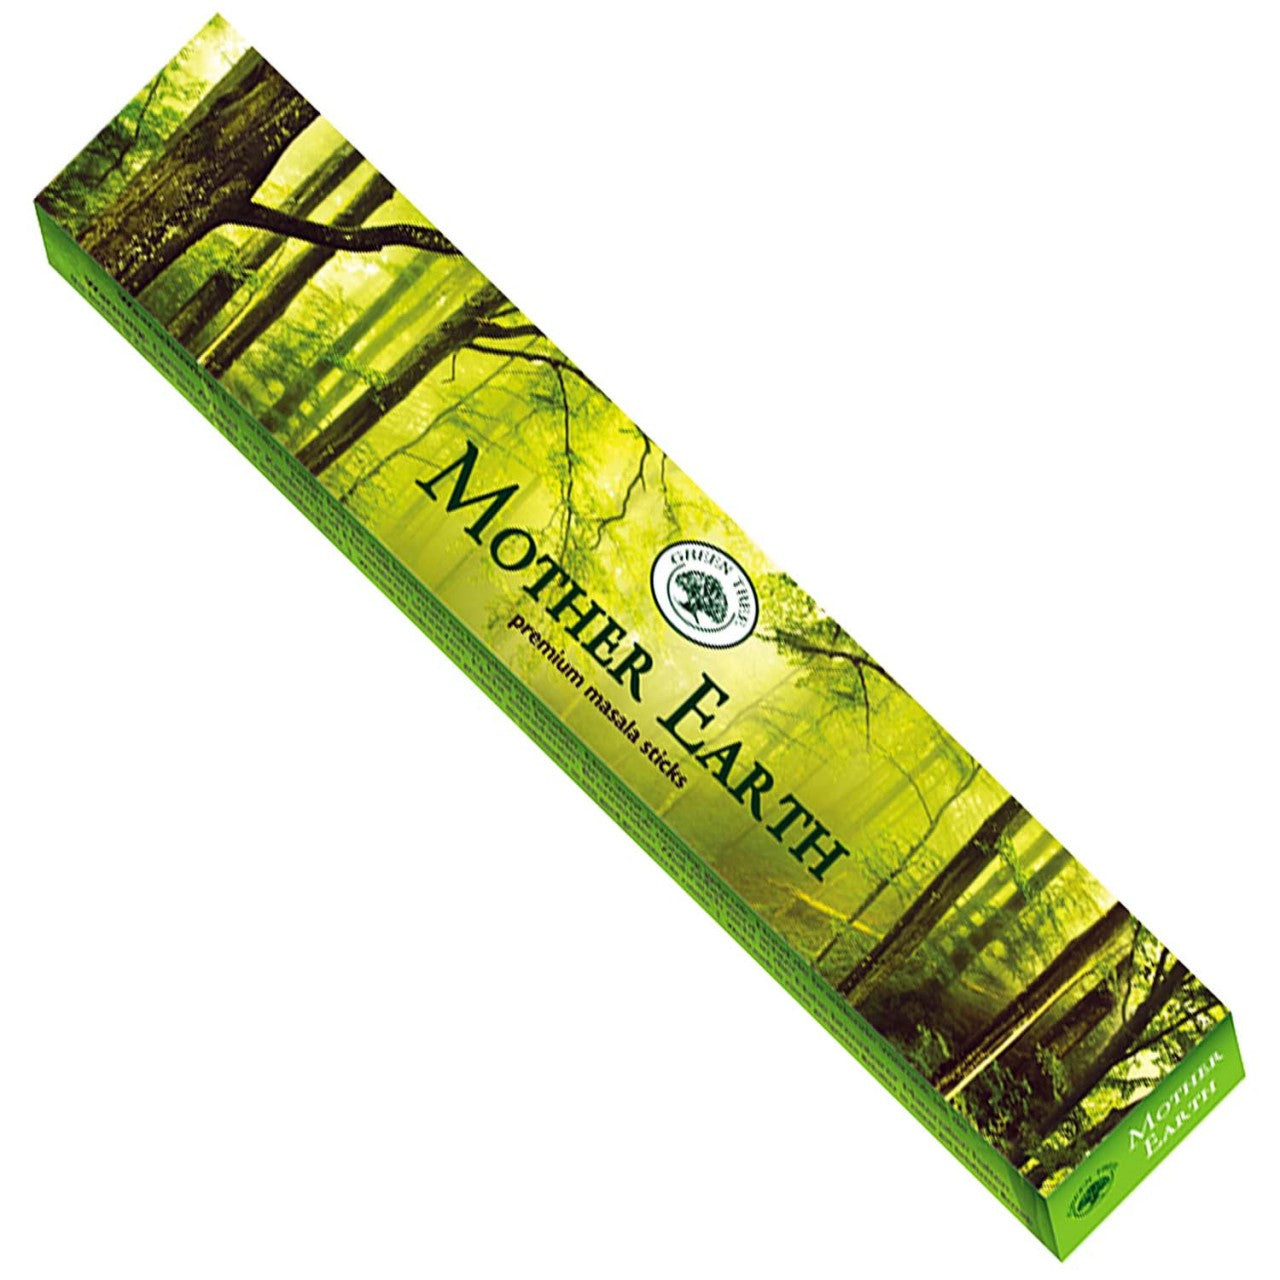 Mother Earth Incense Sticks